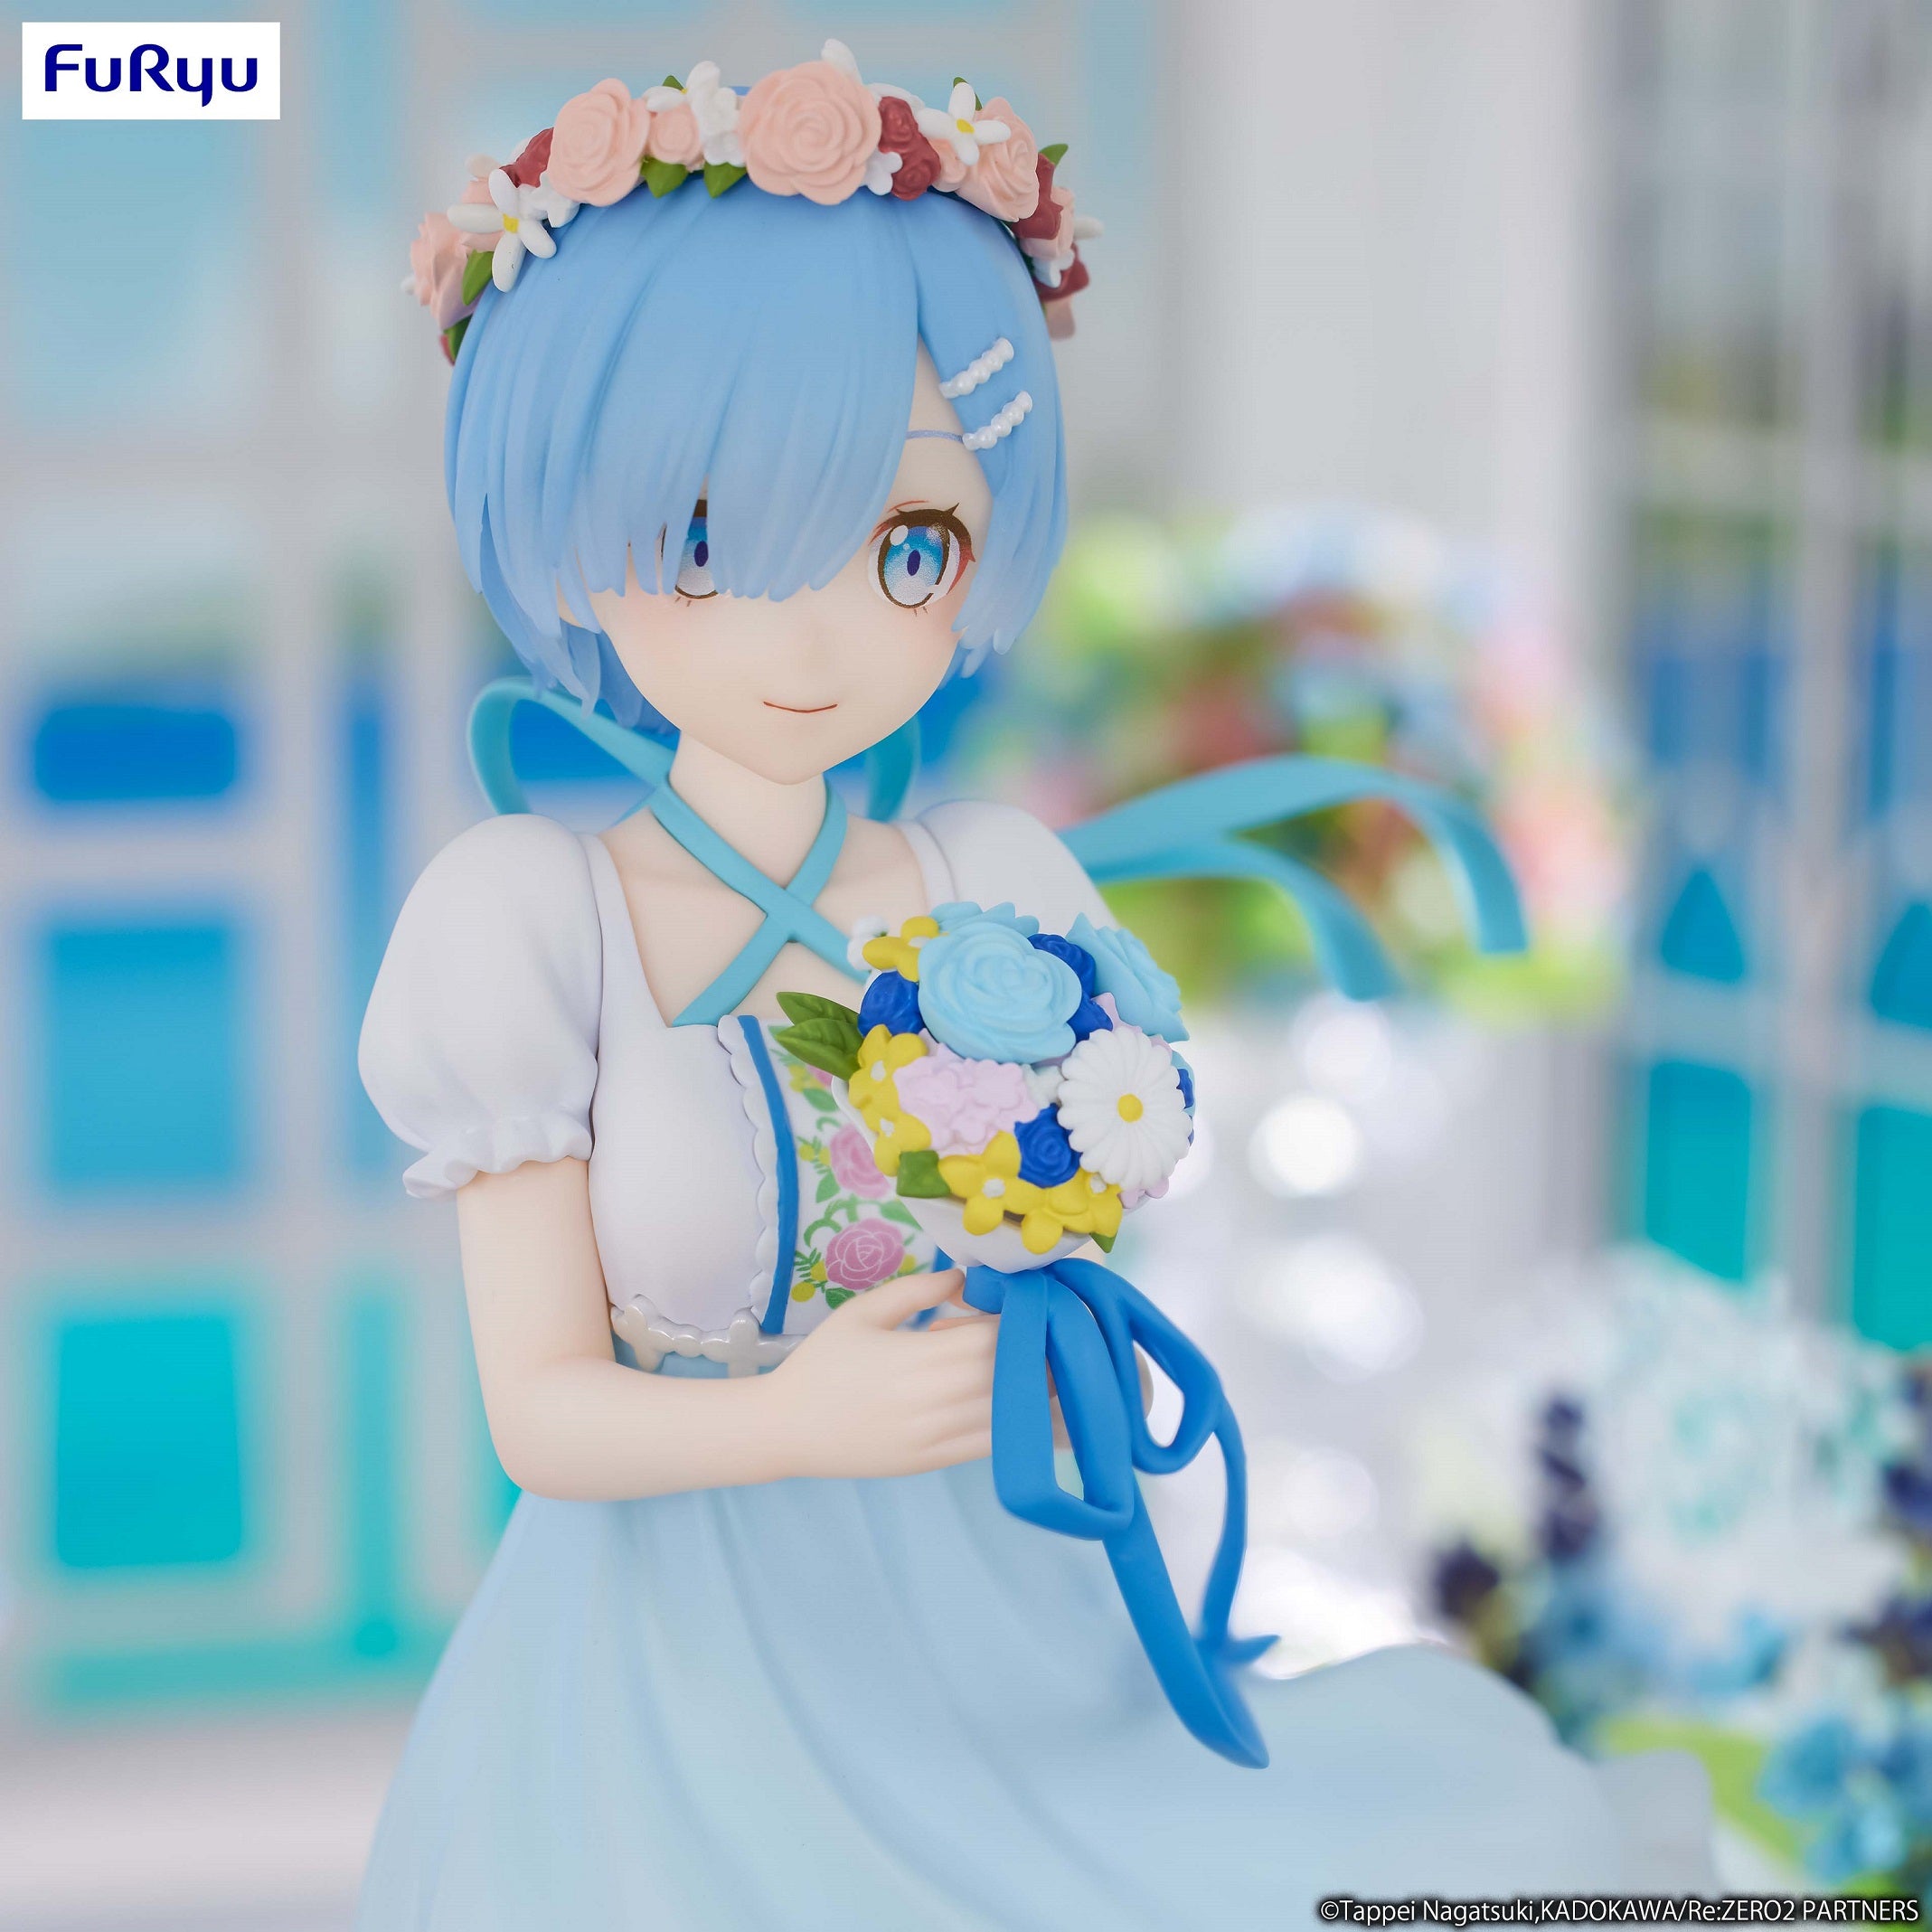 Furyu Figures Trio Try It: Re Zero Starting Life In Another World - Rem Bridesmaid